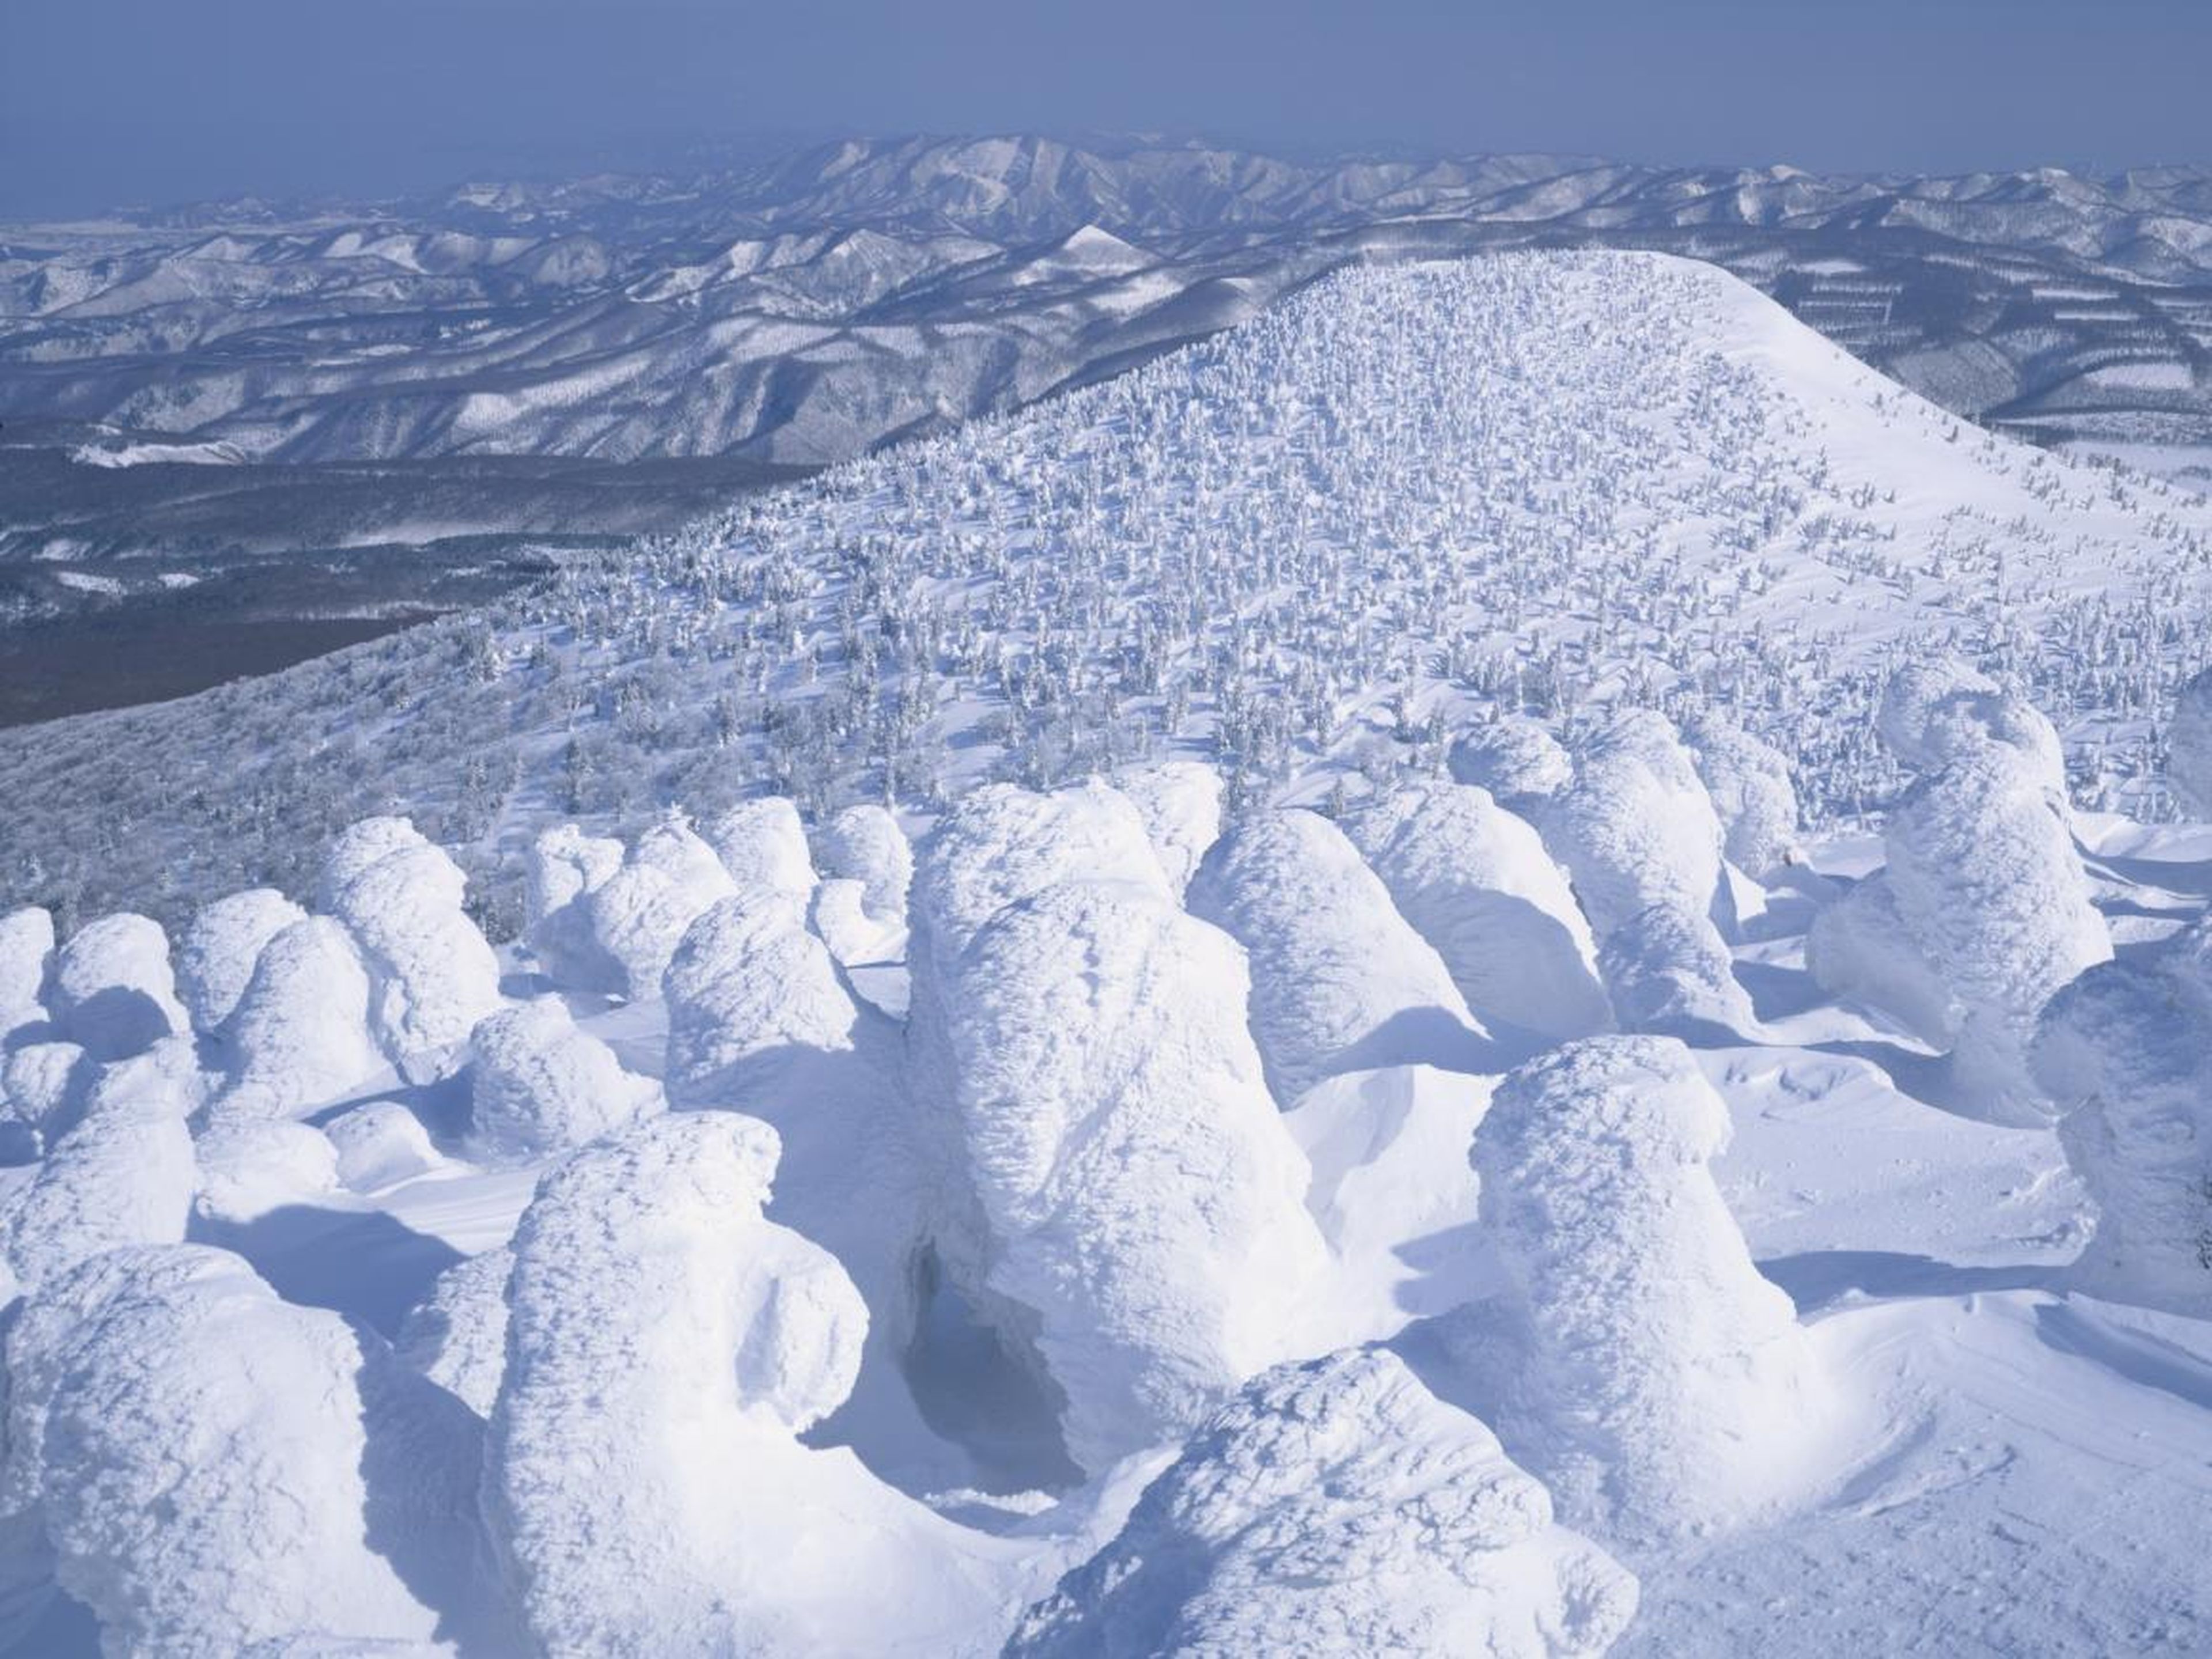 There are also trees all along the nearby Hakkoda mountains that get buried in snow and ice throughout the winter that have come to be known as "silver frost sculptures" or "snow monsters."